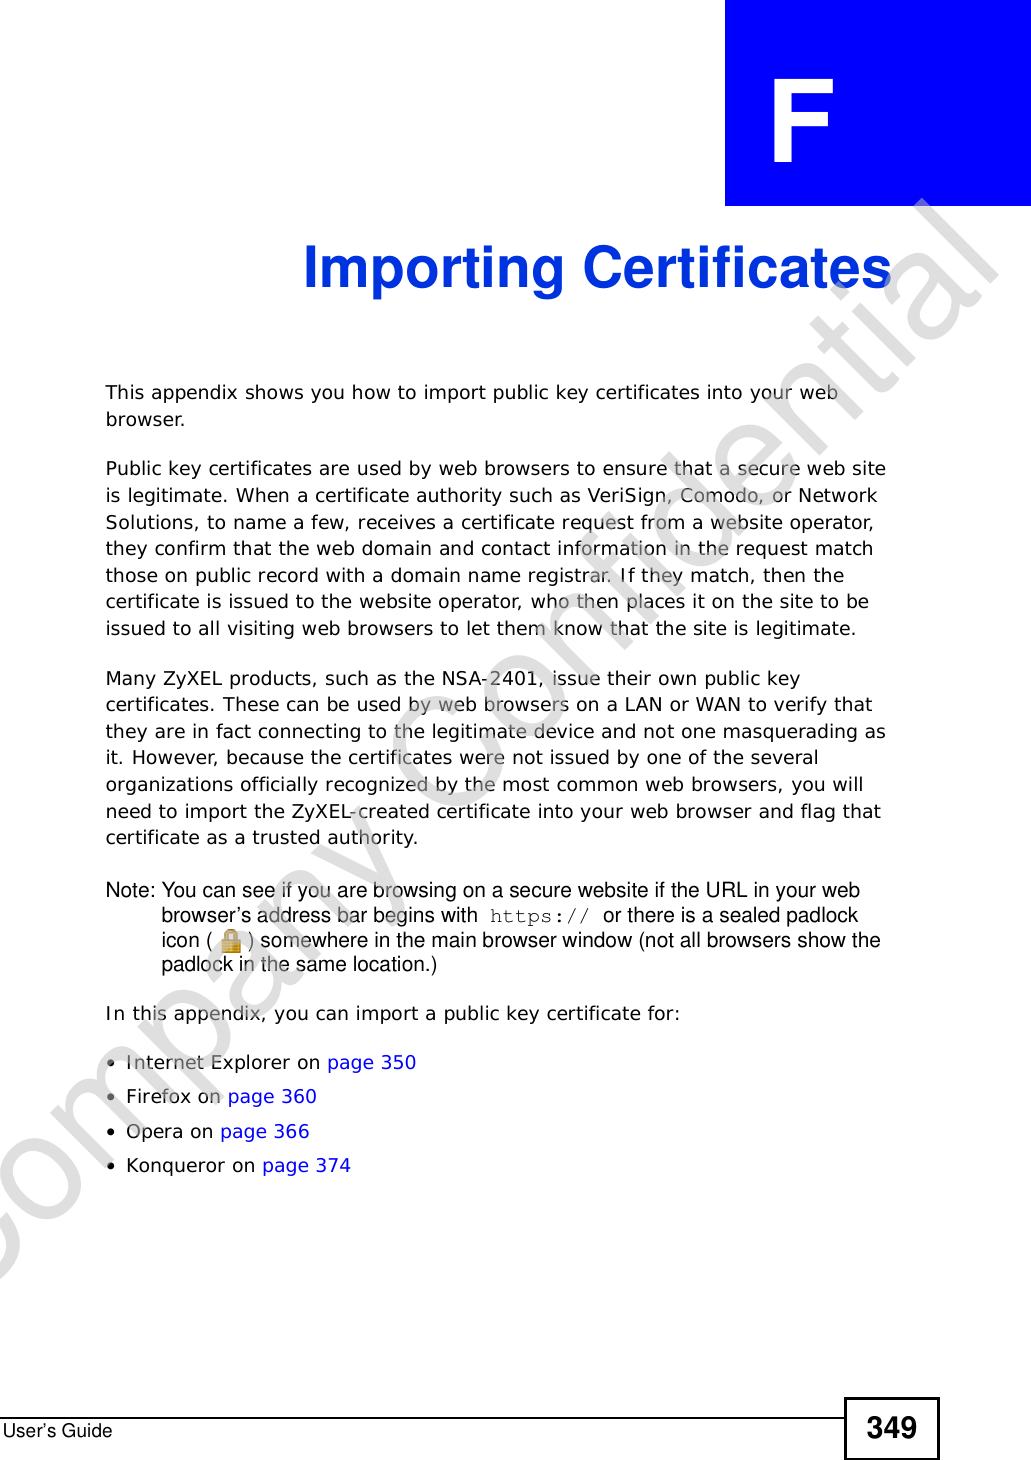 User’s Guide 349APPENDIX  F Importing CertificatesThis appendix shows you how to import public key certificates into your web browser. Public key certificates are used by web browsers to ensure that a secure web site is legitimate. When a certificate authority such as VeriSign, Comodo, or Network Solutions, to name a few, receives a certificate request from a website operator, they confirm that the web domain and contact information in the request match those on public record with a domain name registrar. If they match, then the certificate is issued to the website operator, who then places it on the site to be issued to all visiting web browsers to let them know that the site is legitimate.Many ZyXEL products, such as the NSA-2401, issue their own public key certificates. These can be used by web browsers on a LAN or WAN to verify that they are in fact connecting to the legitimate device and not one masquerading as it. However, because the certificates were not issued by one of the several organizations officially recognized by the most common web browsers, you will need to import the ZyXEL-created certificate into your web browser and flag that certificate as a trusted authority.Note: You can see if you are browsing on a secure website if the URL in your web browser’s address bar begins with  https:// or there is a sealed padlock icon () somewhere in the main browser window (not all browsers show the padlock in the same location.)In this appendix, you can import a public key certificate for:•Internet Explorer on page 350•Firefox on page 360•Opera on page 366•Konqueror on page 374Company Confidential